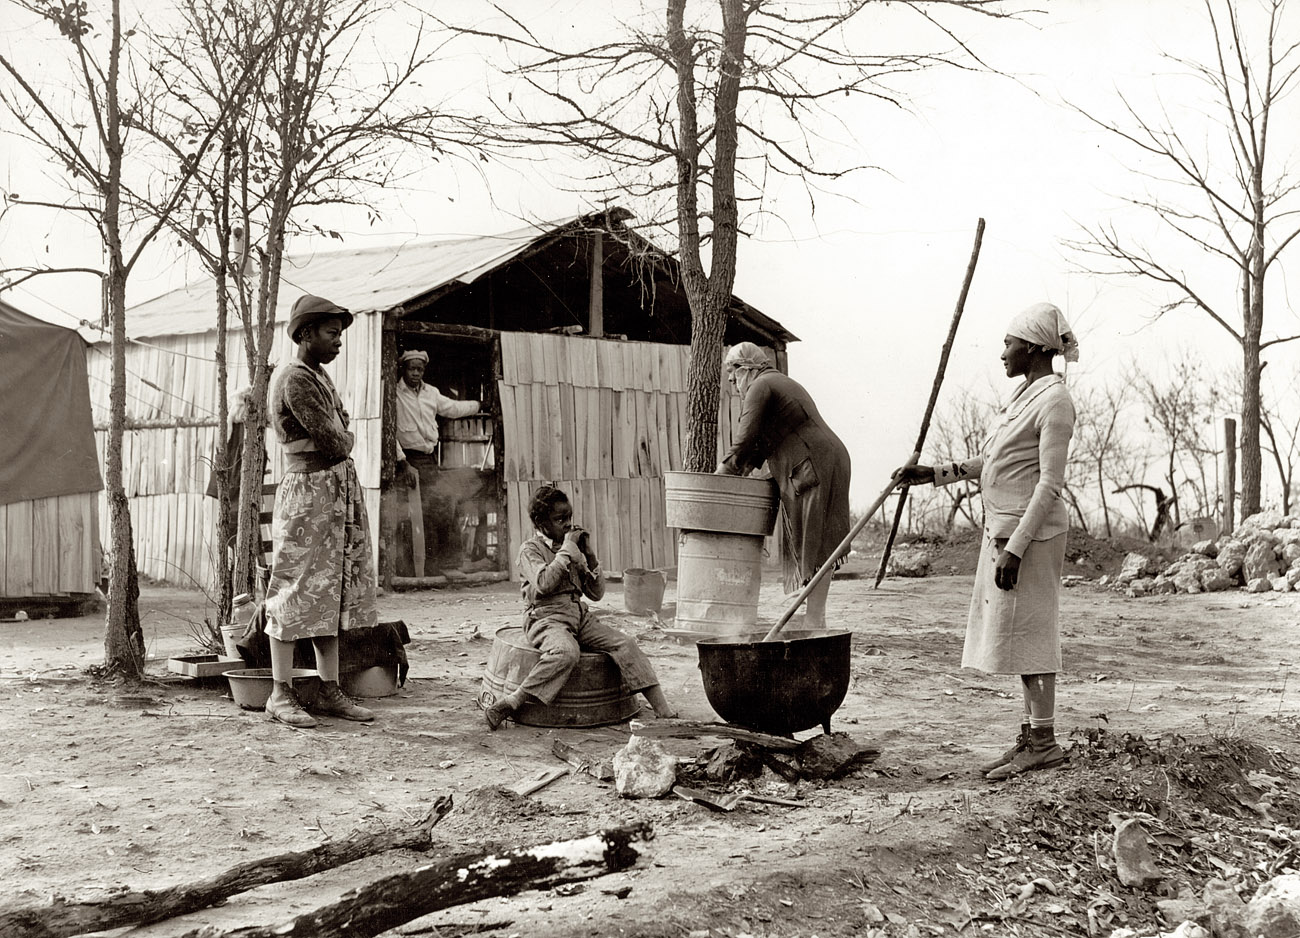 November 1939. Butler County, Missouri. "Washing clothes at camp for evicted sharecroppers." View full size. Medium format negative by Arthur Rothstein.